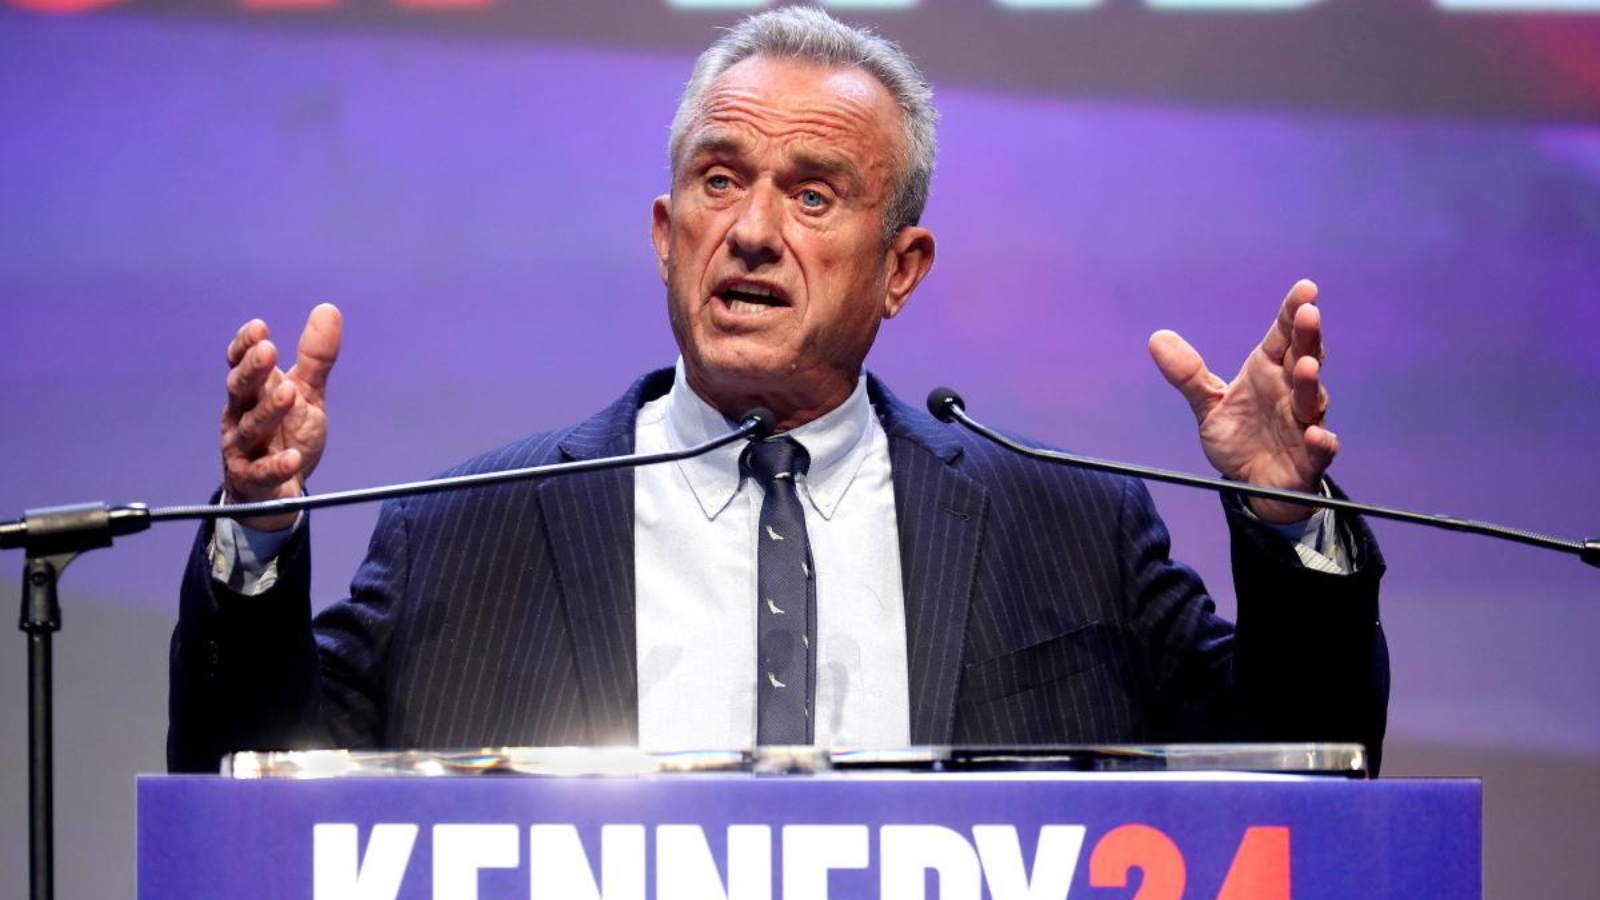 Anti-vax populist Robert Kennedy Jr. makes waves in presidential election. Who are his Wisconsin supporters?